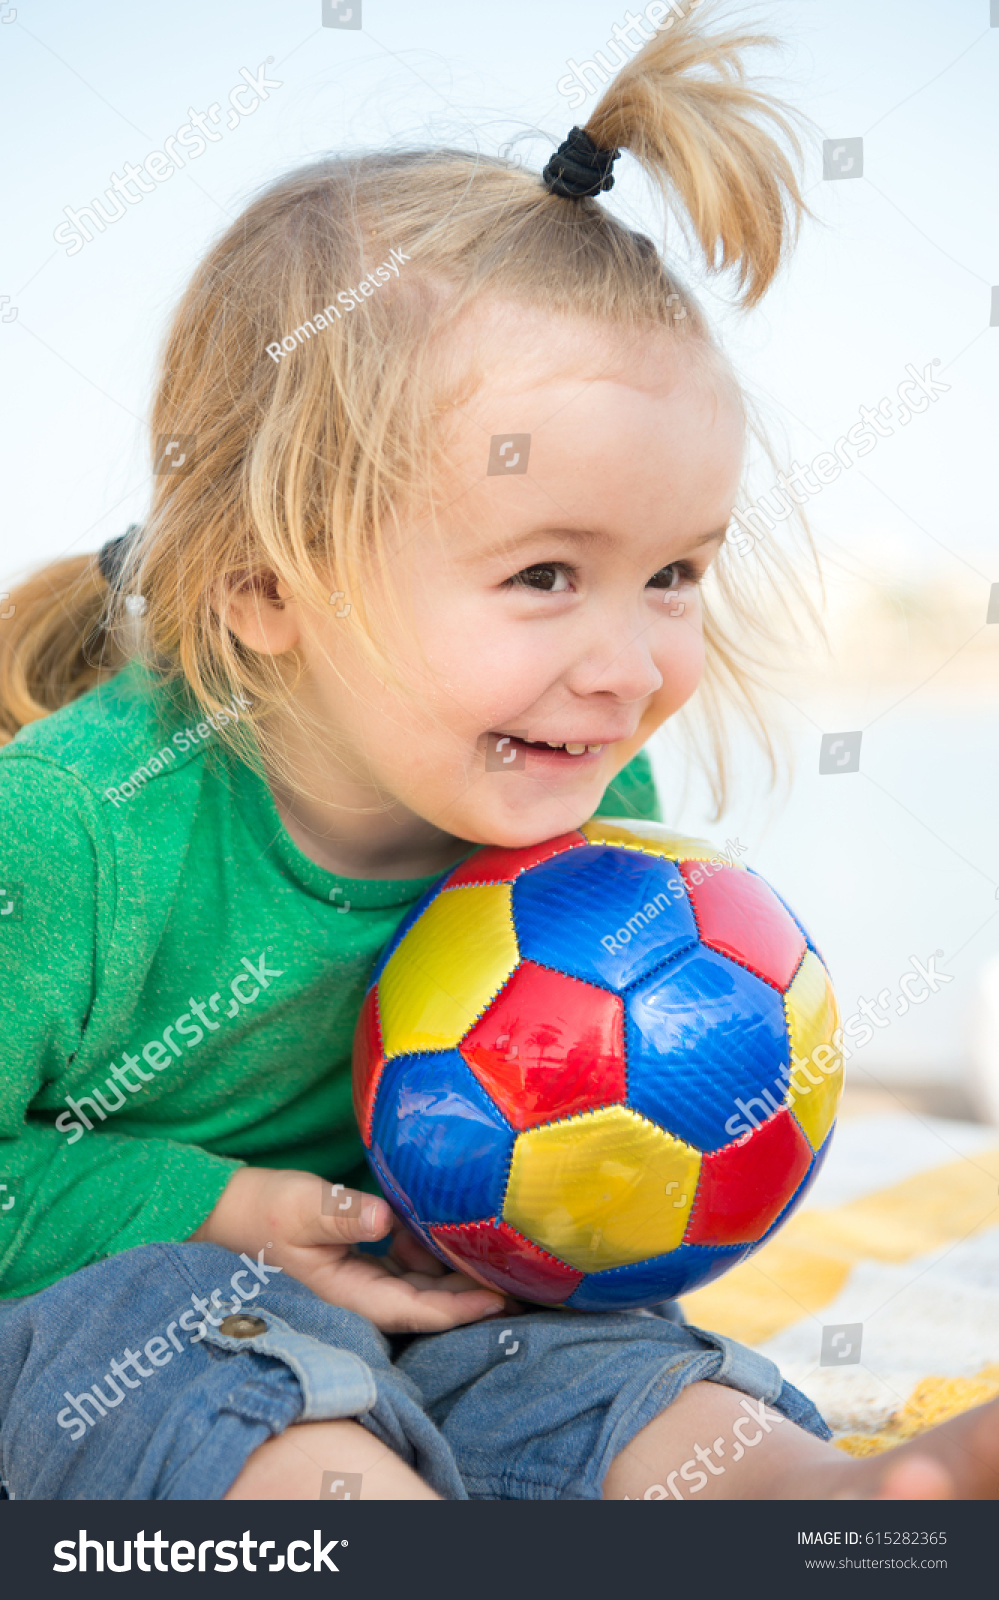 Small Baby Boy Cute Child Happy Stock Photo Edit Now 615282365